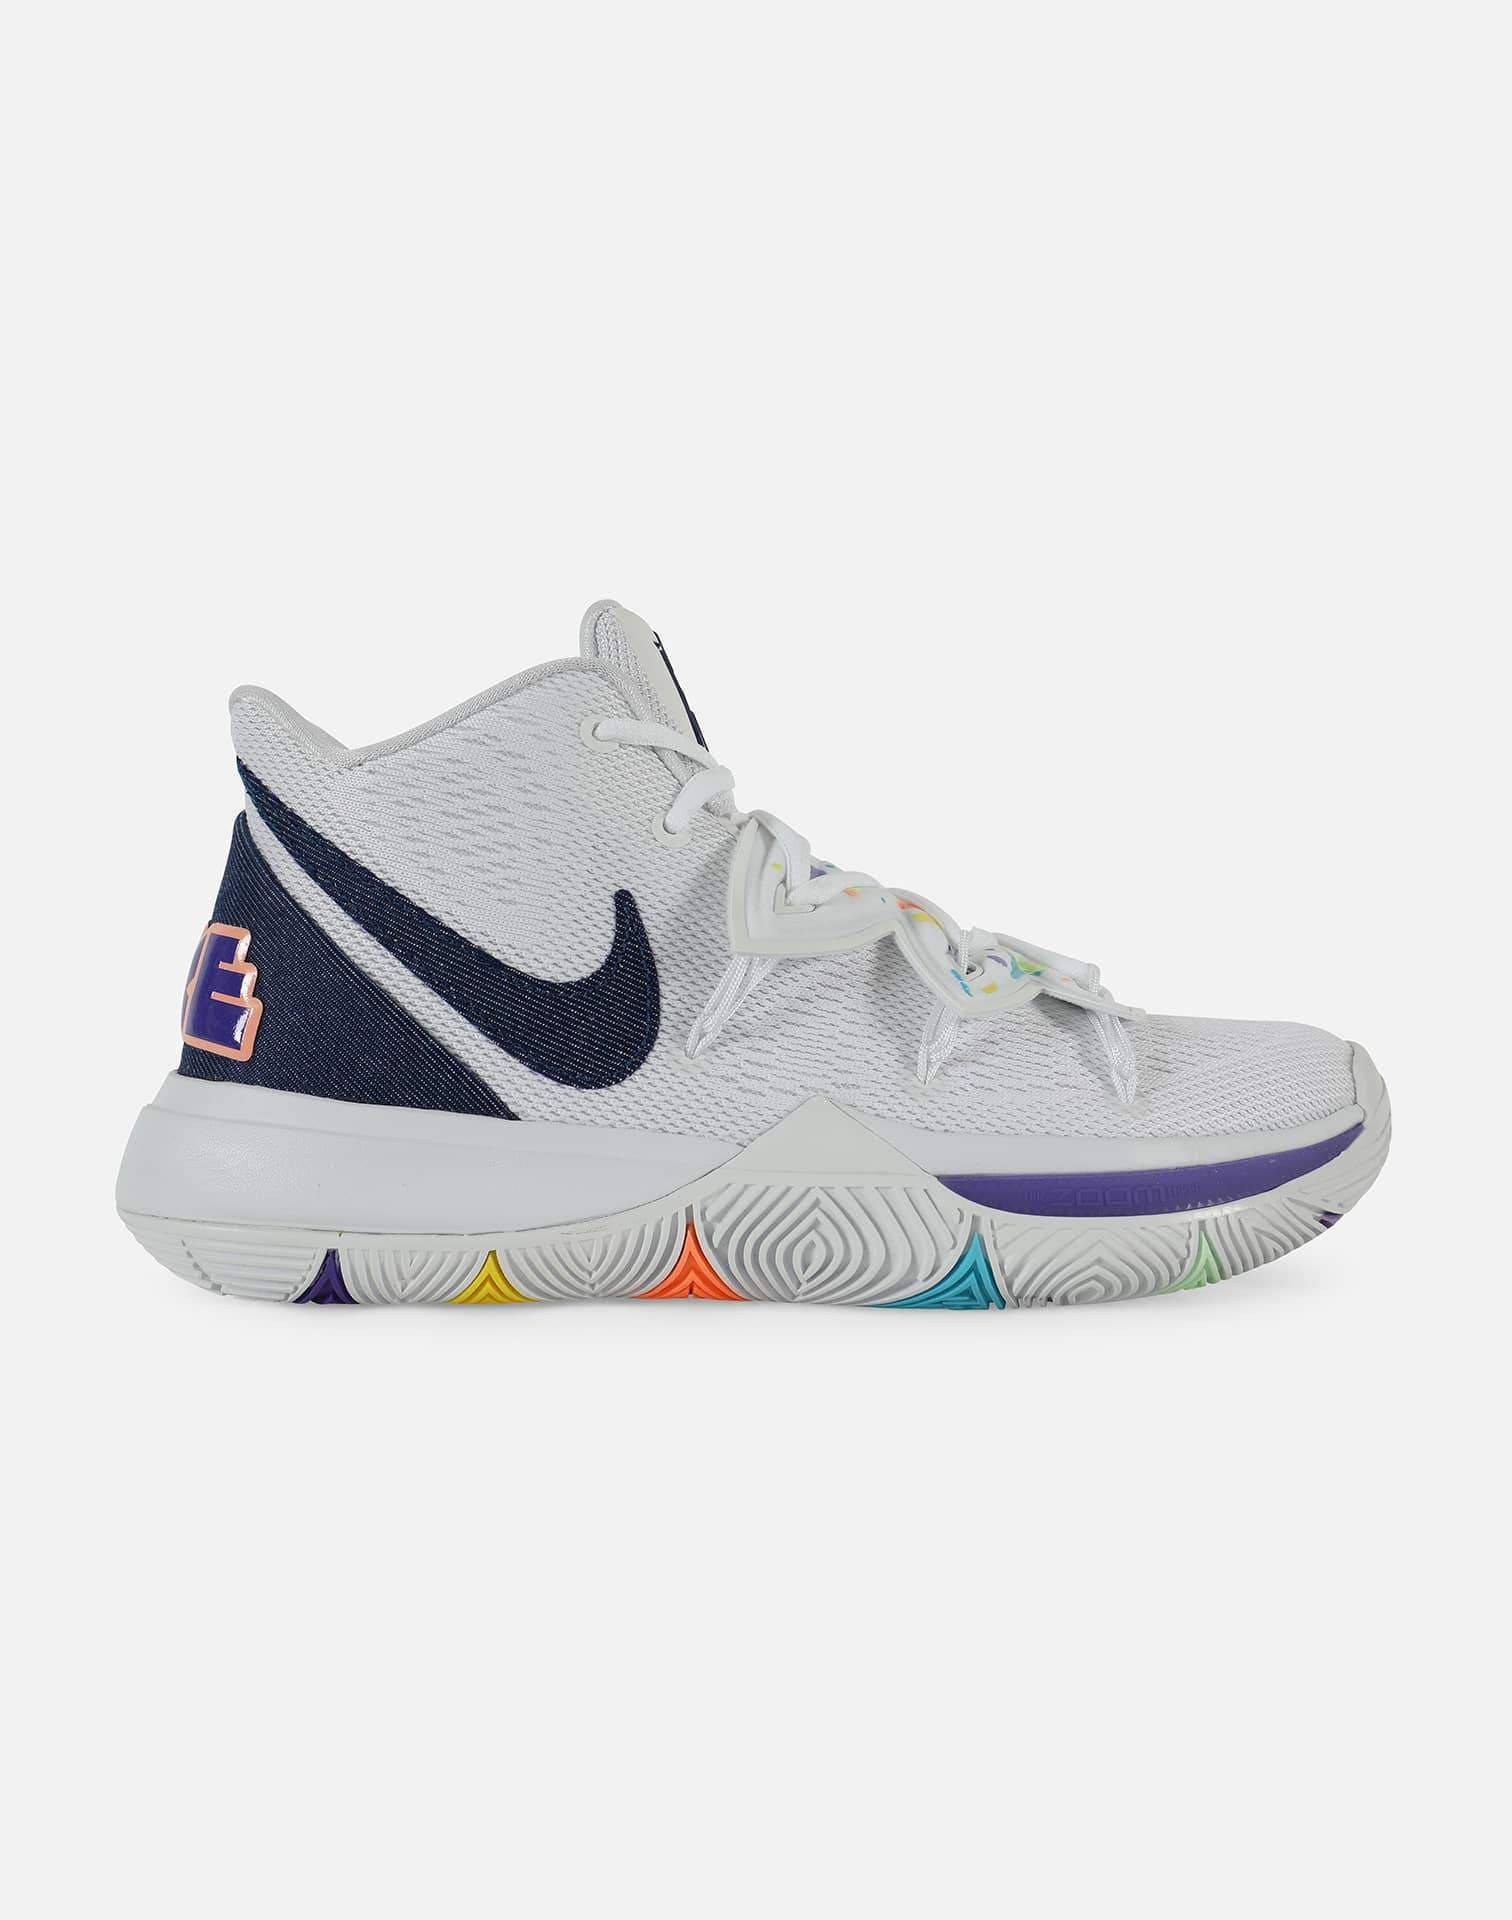 Nike Men's Kyrie 5 'Have a Nike Day'